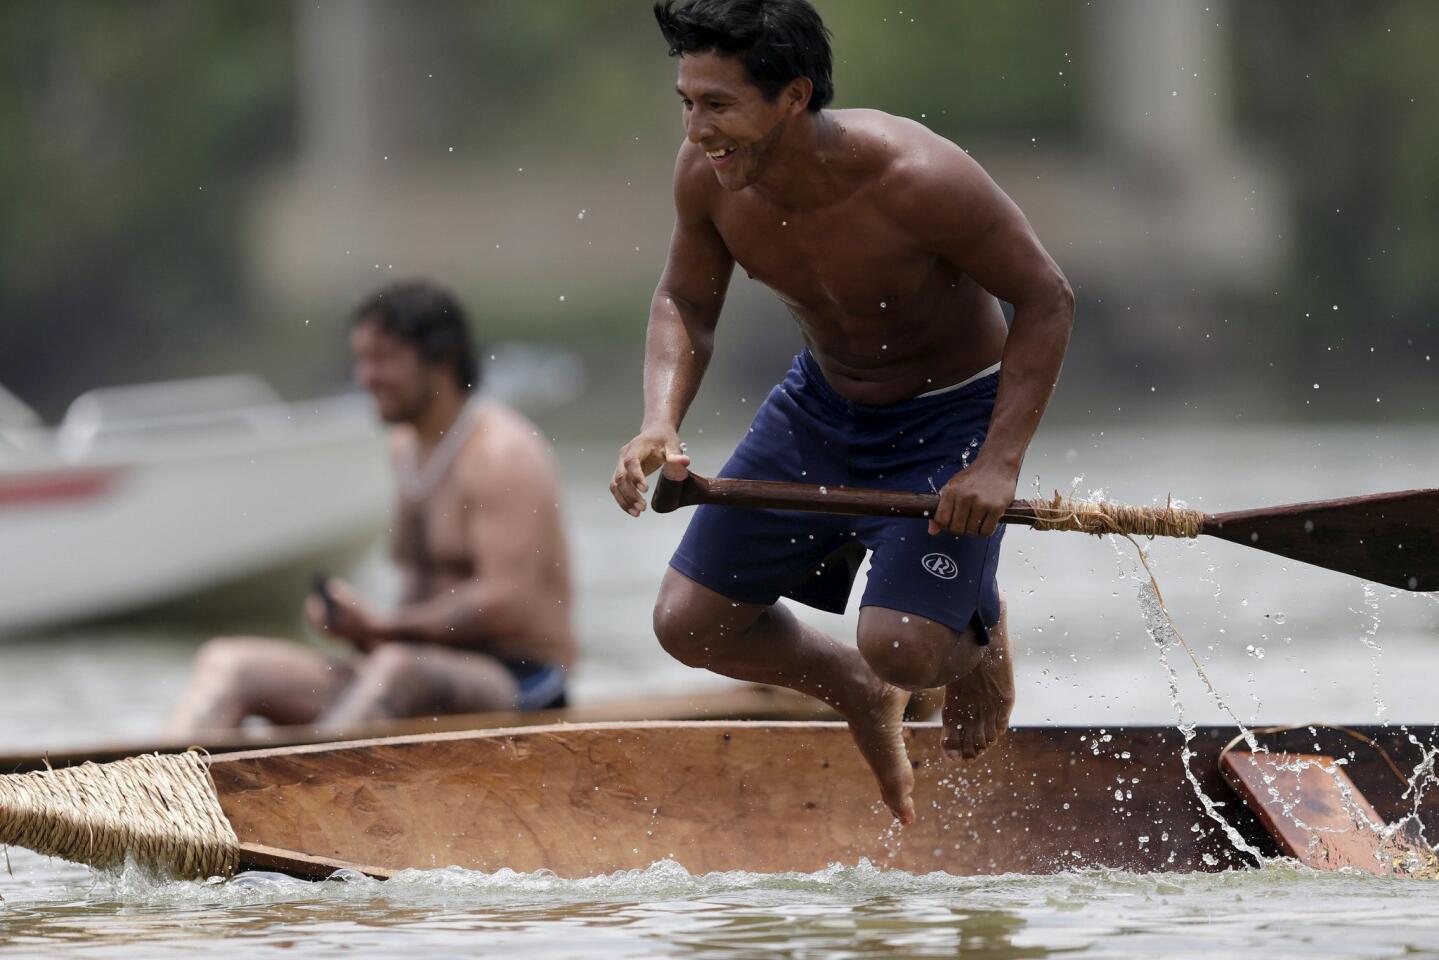 A indigenous man practices canoeing during the first World Games for Indigenous Peoples in Palmas